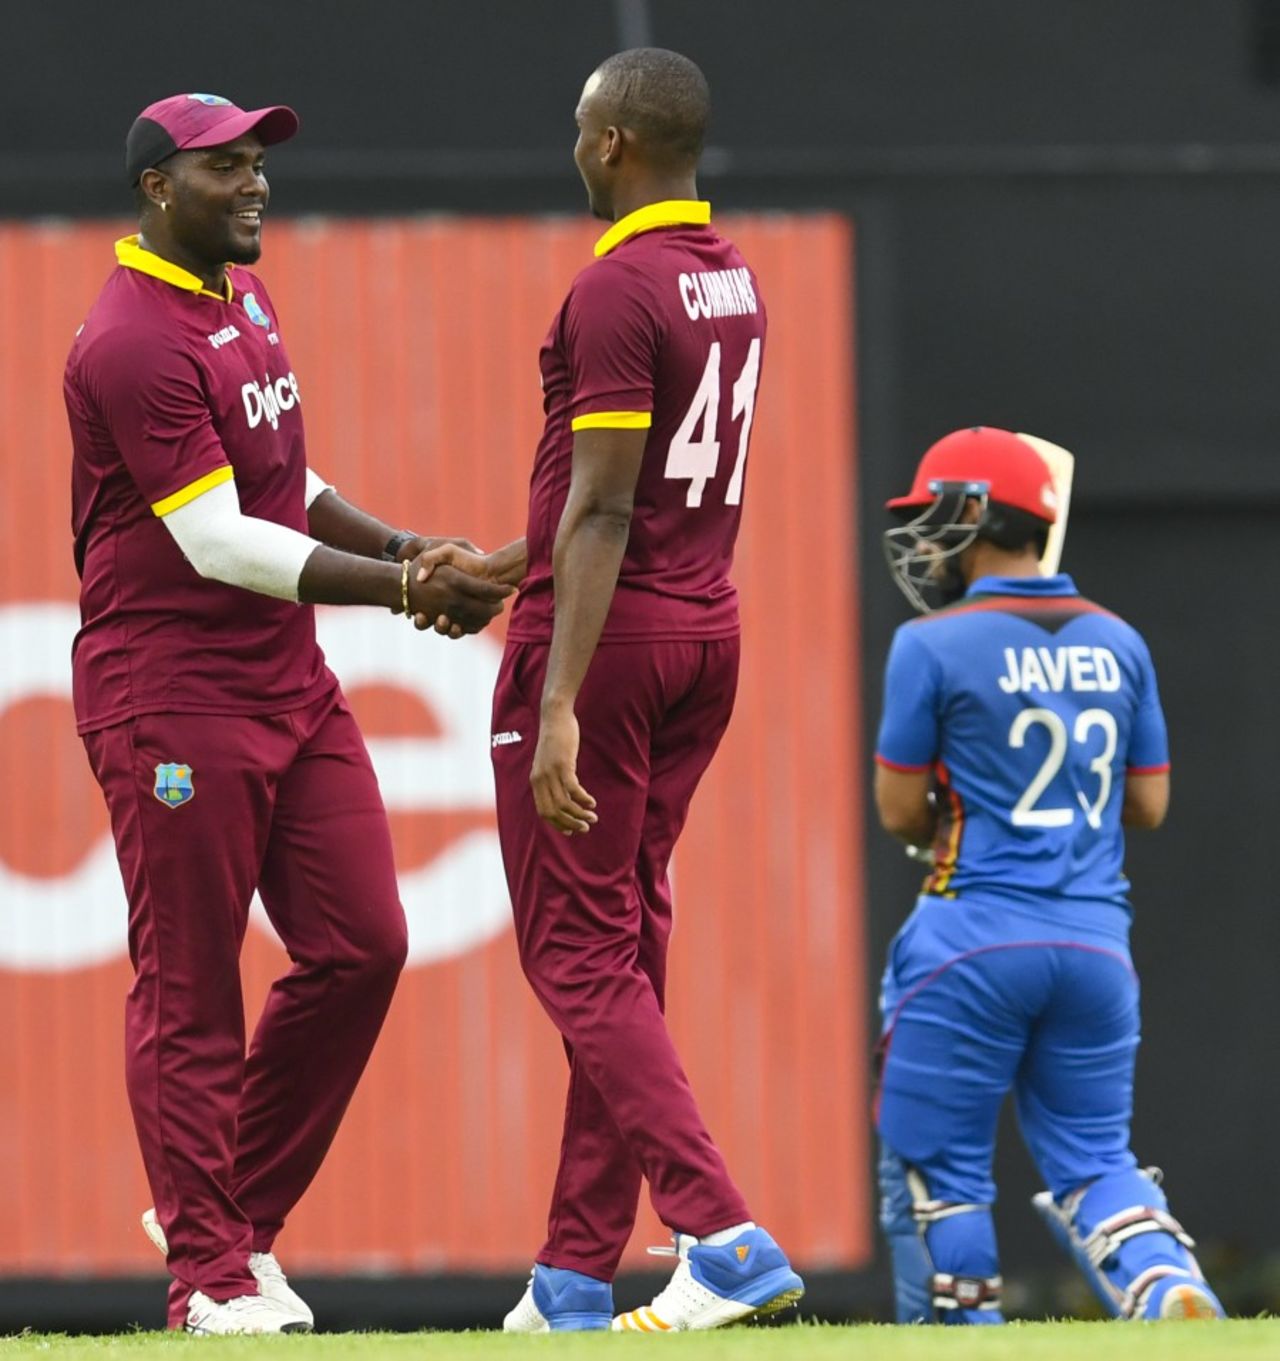 Miguel Cummins and Ashley Nurse celebrate a wicket, West Indies v Afghanistan, 1st ODI, St Lucia, June 9, 2017